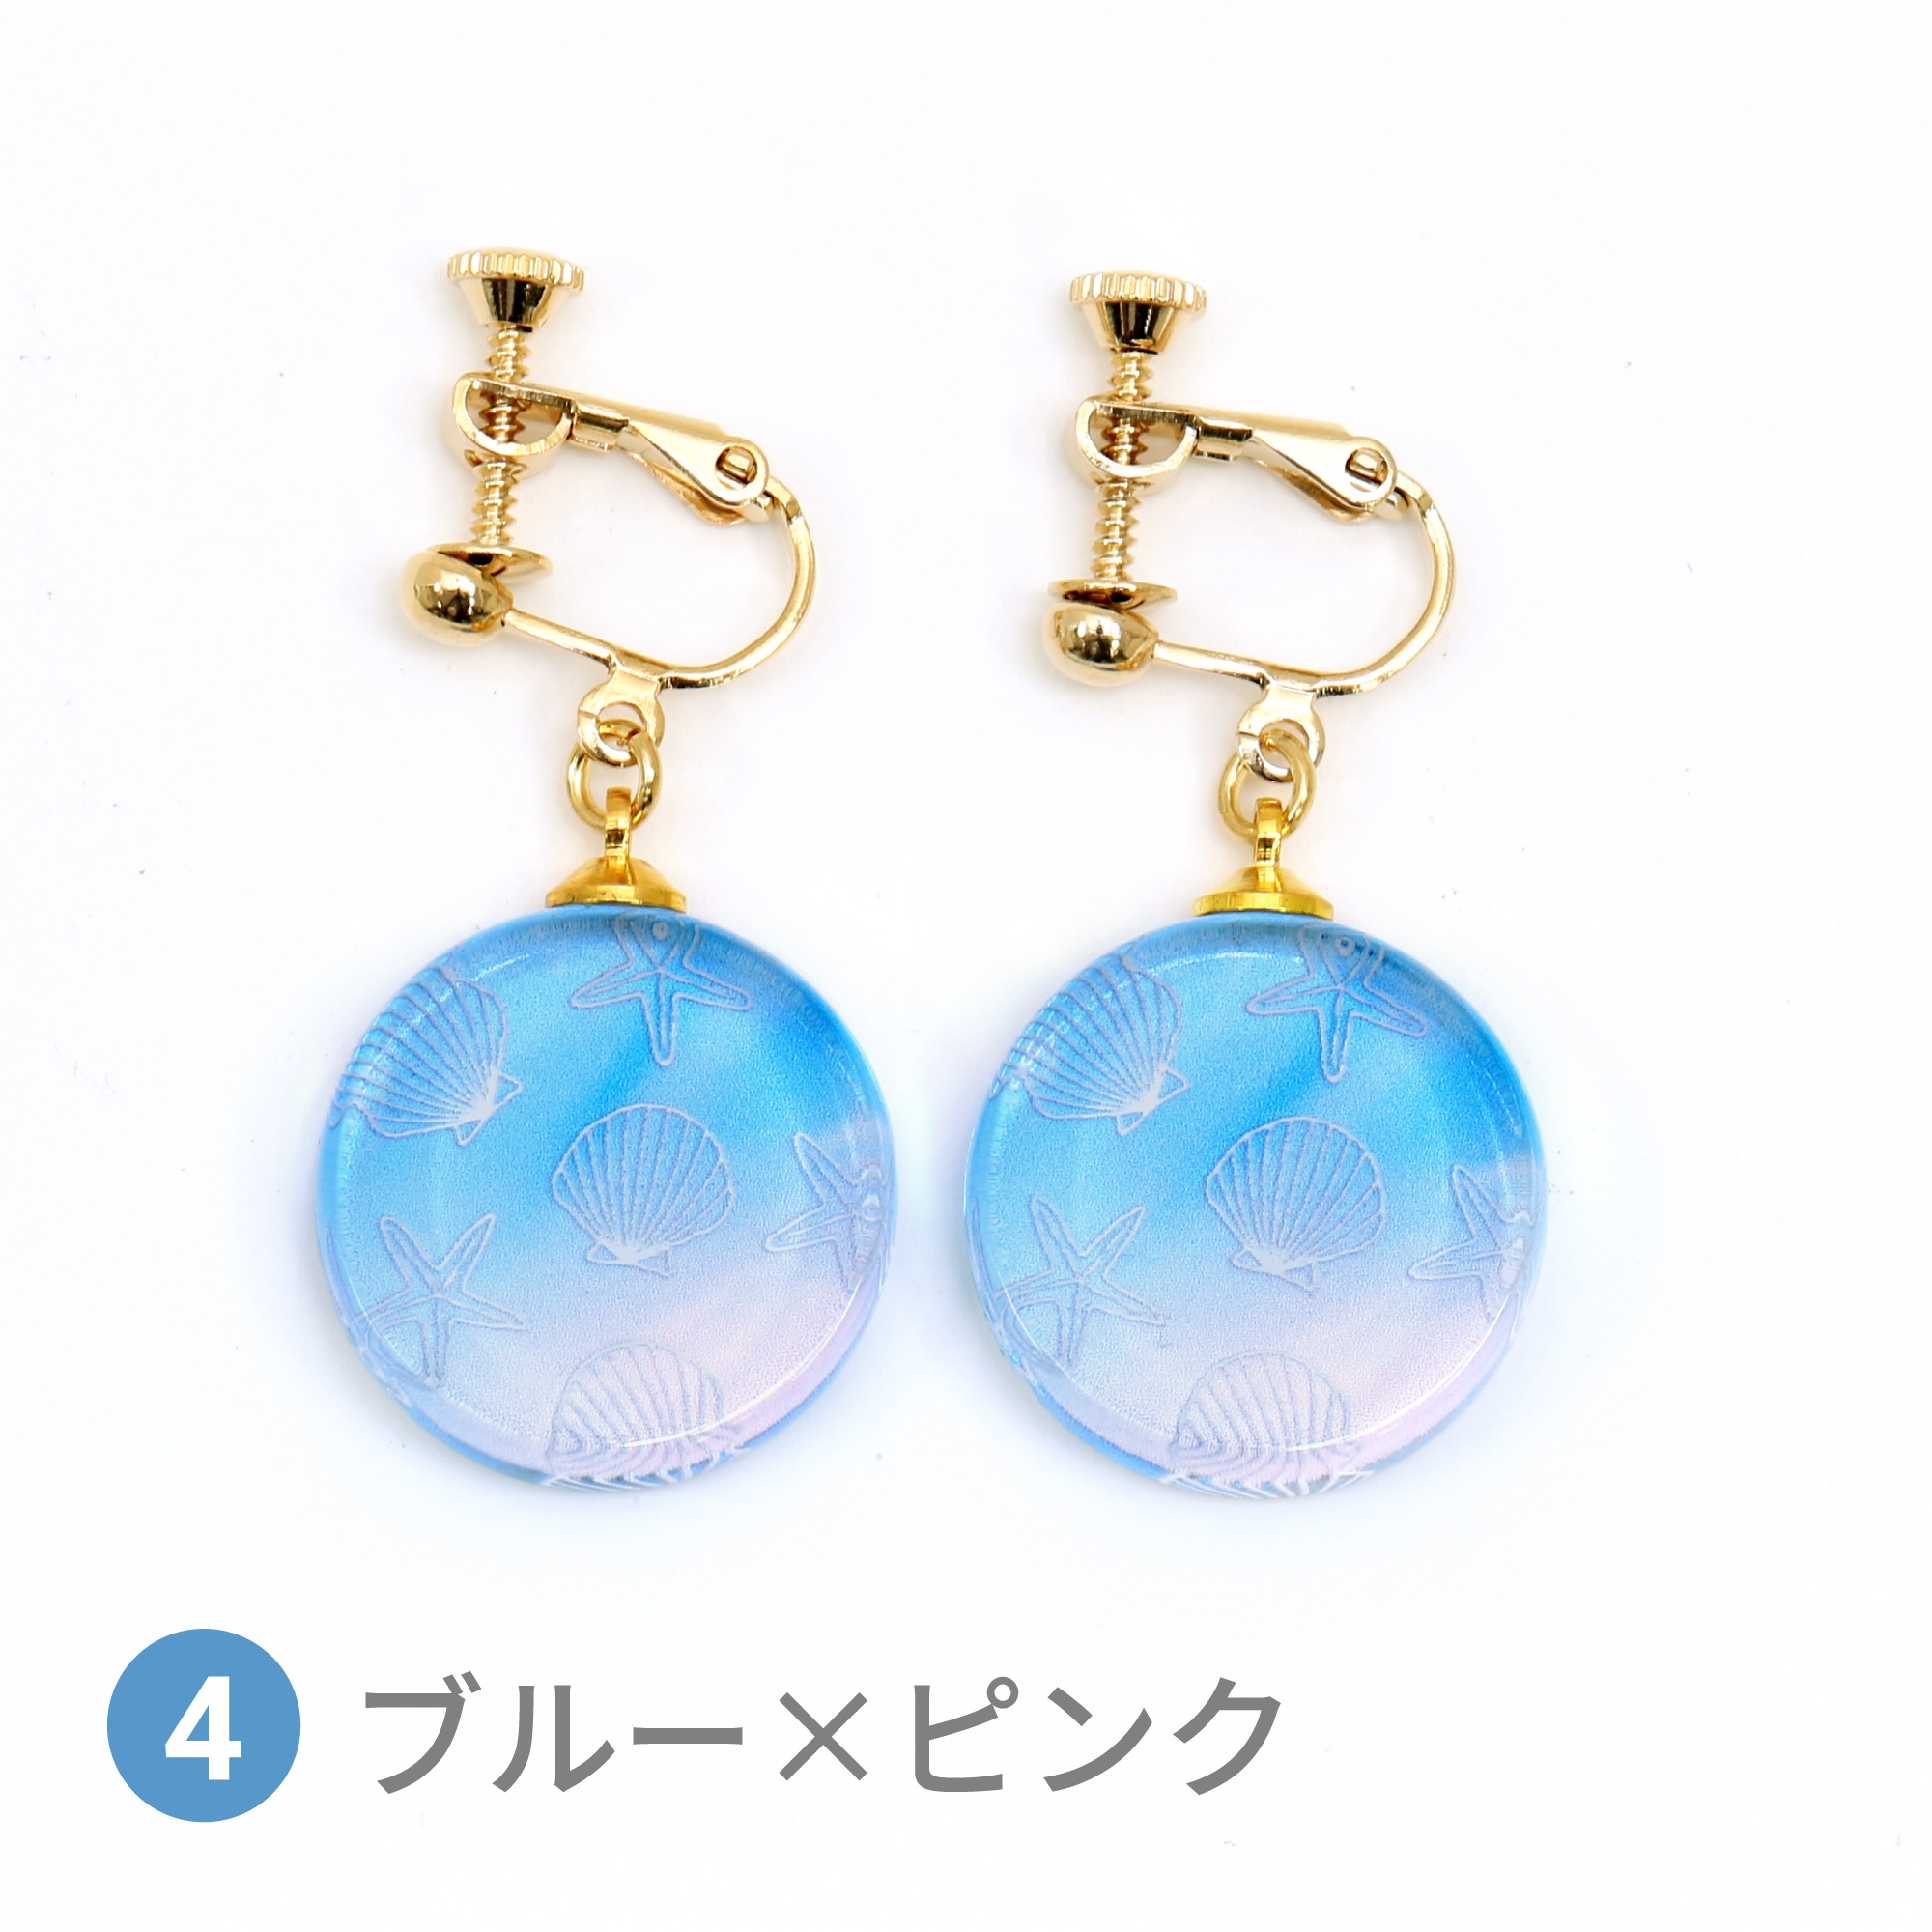 Glass accessories Earring SHELL blue & pink round shape